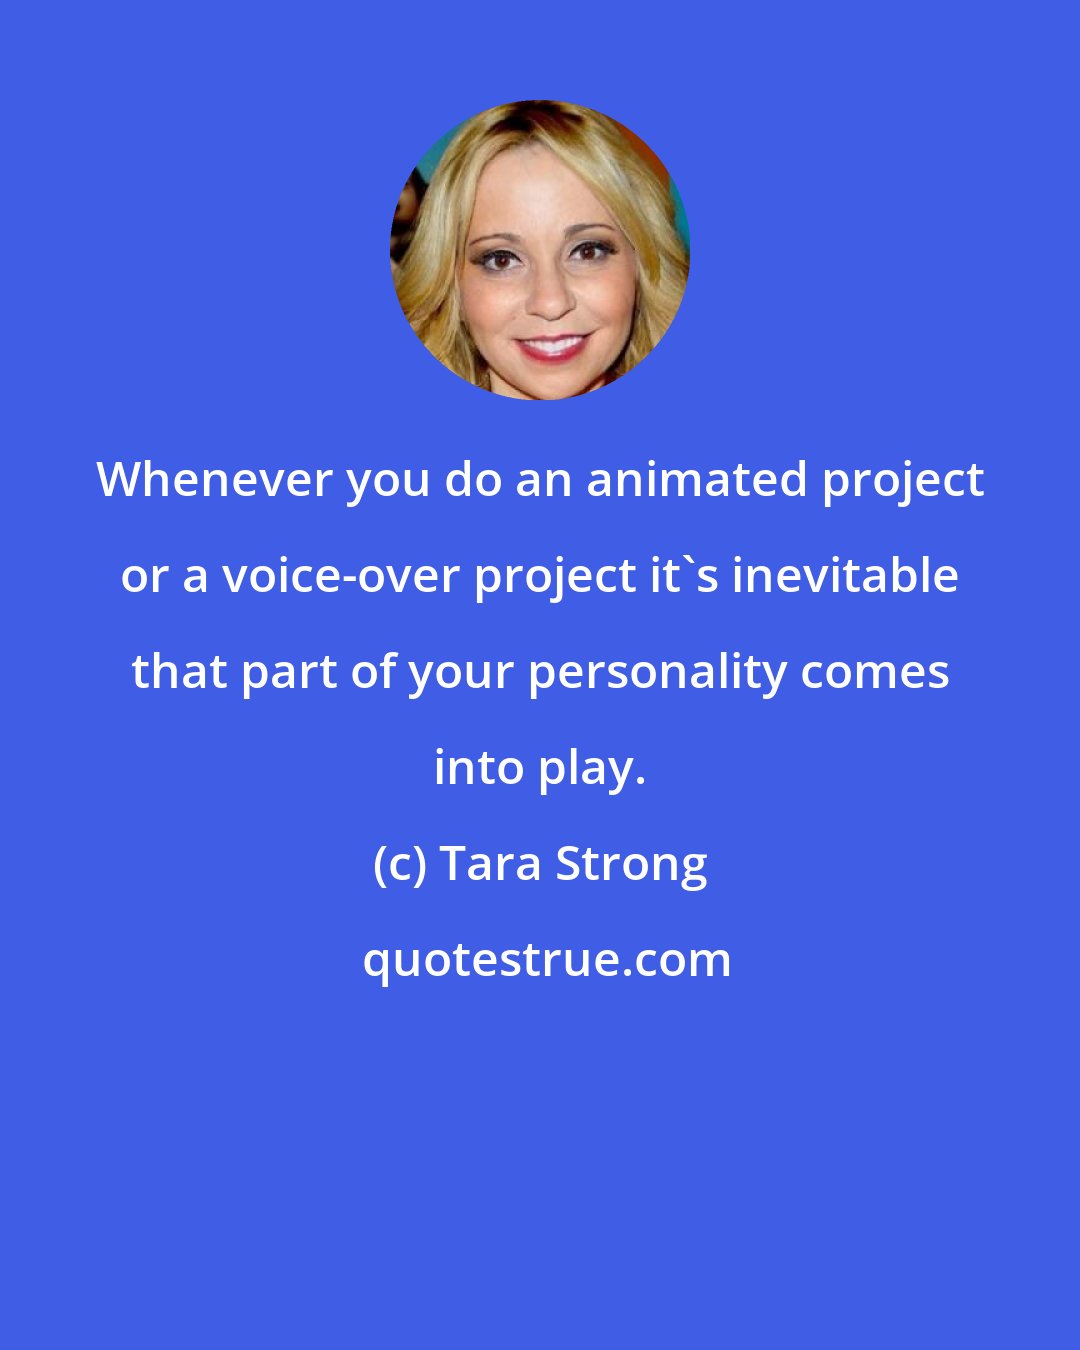 Tara Strong: Whenever you do an animated project or a voice-over project it's inevitable that part of your personality comes into play.